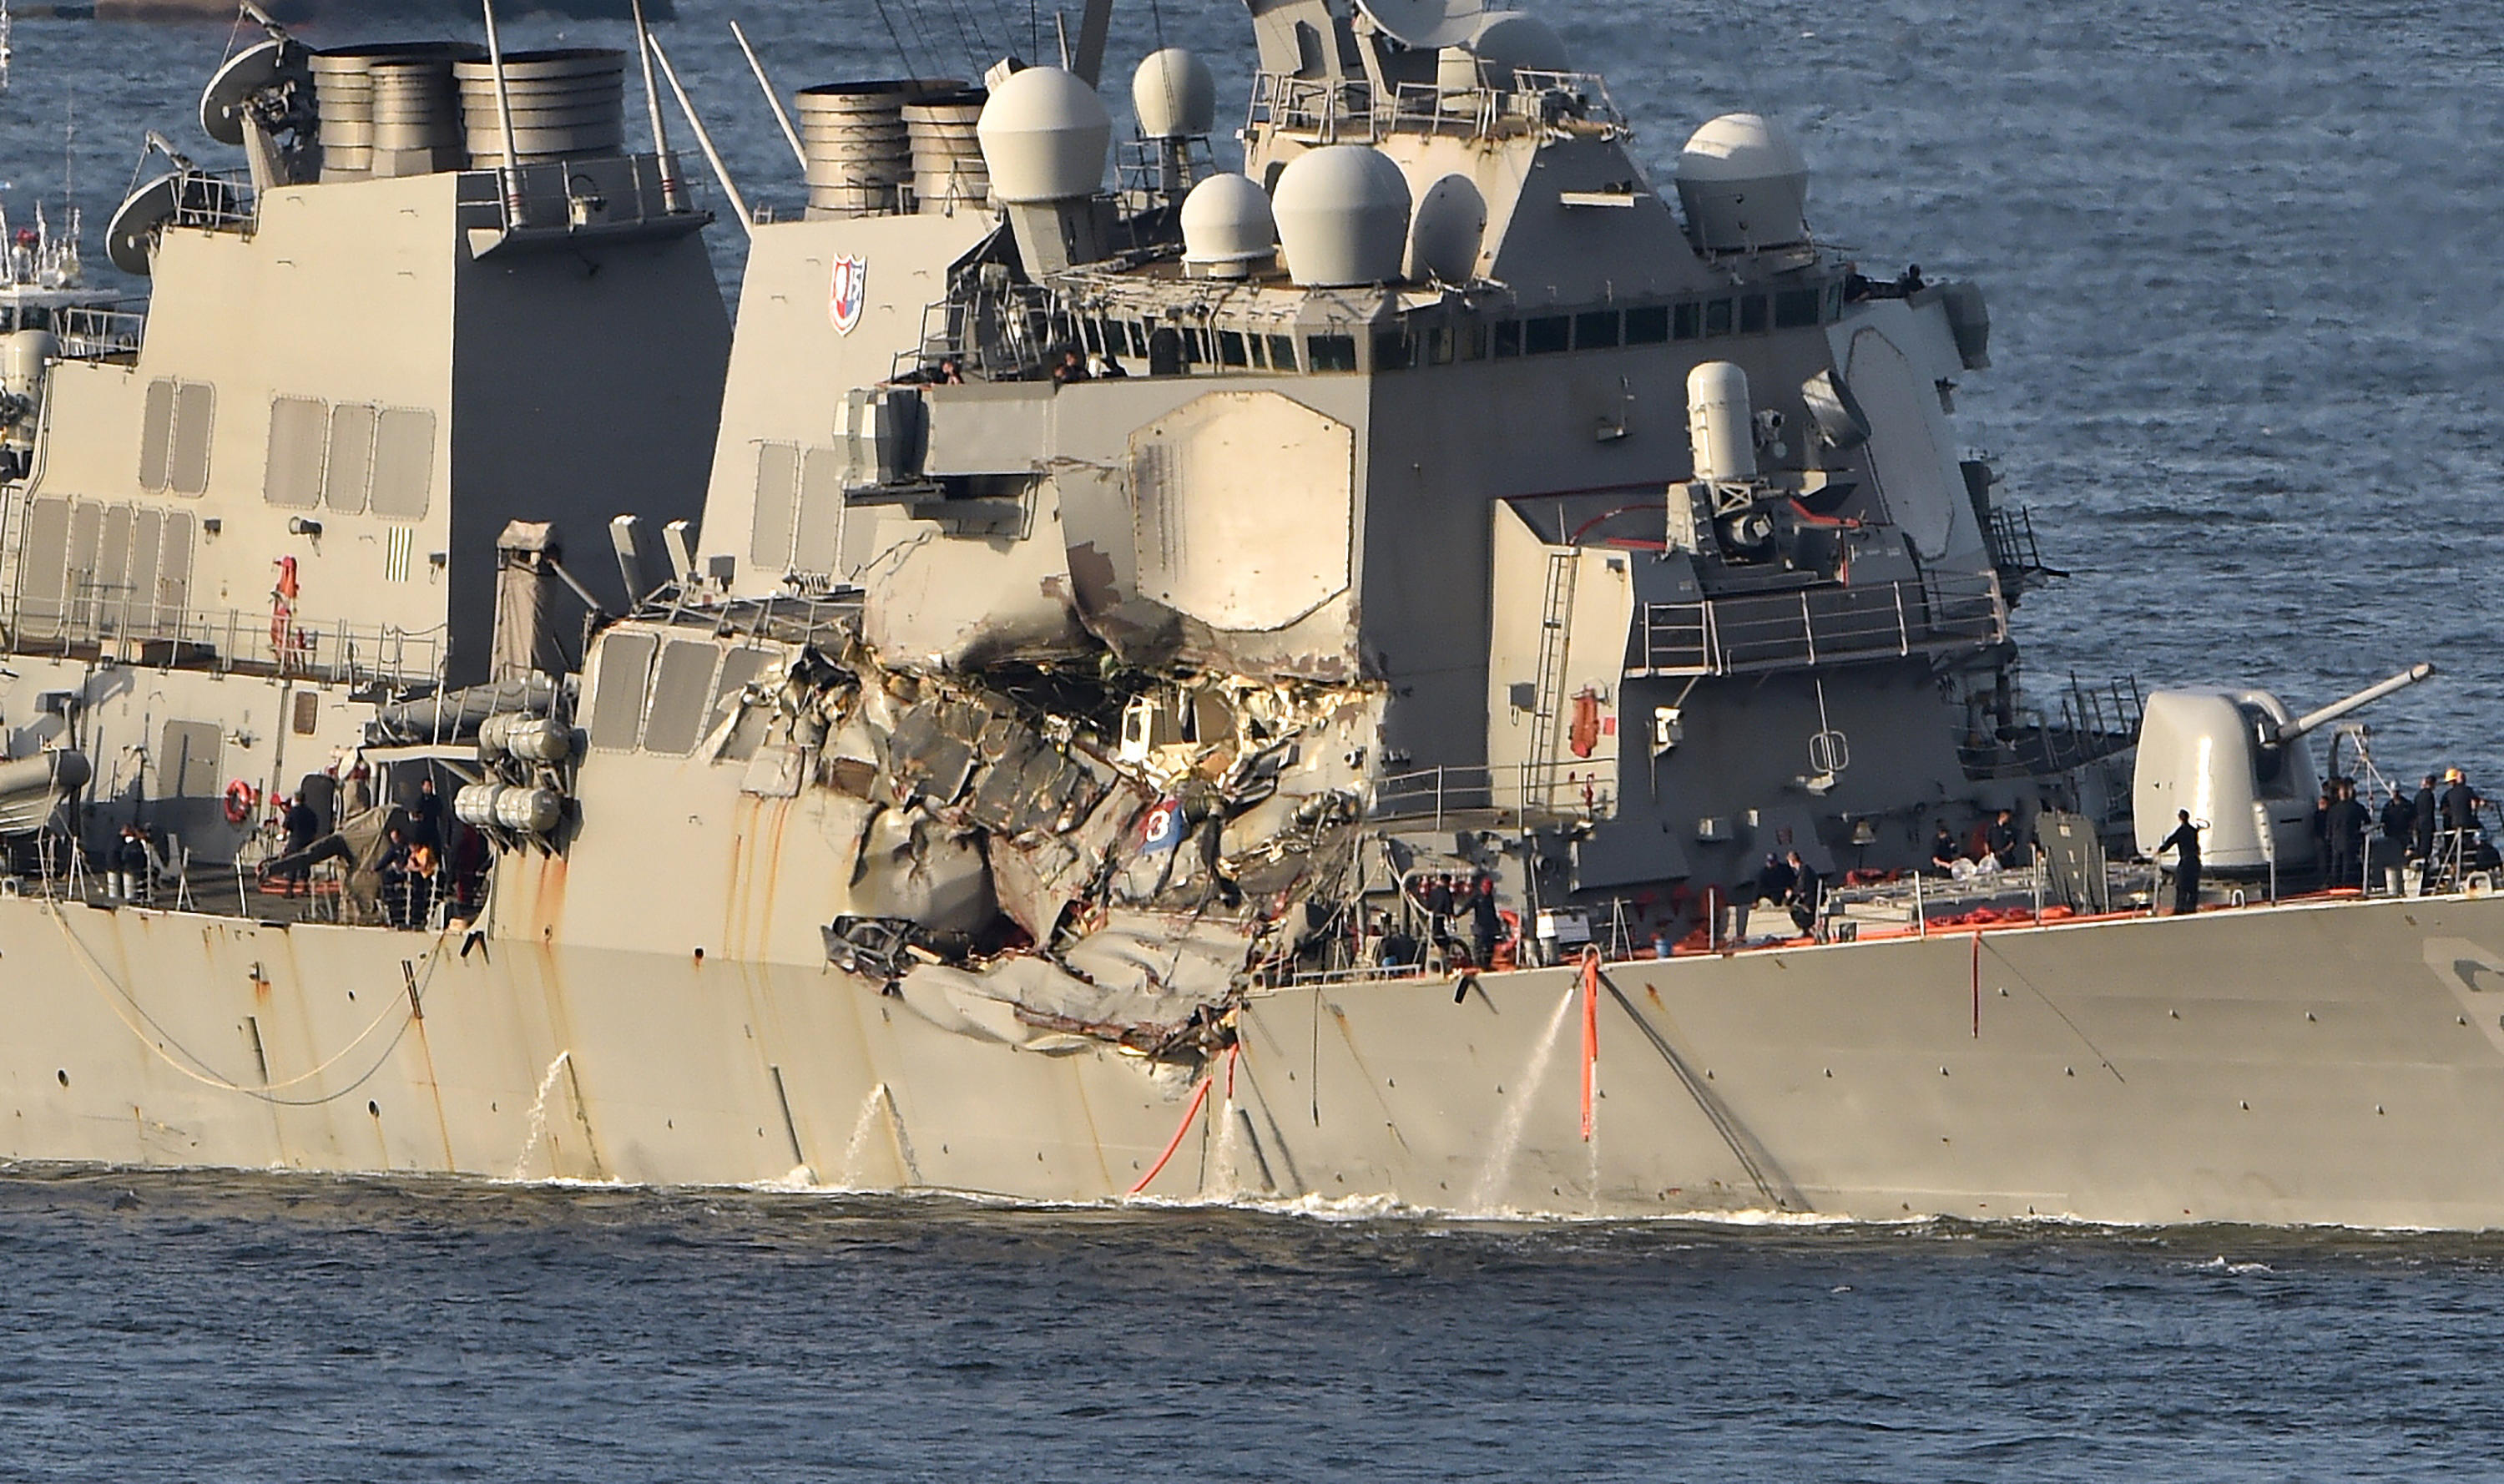 7 sailors missing from USS Fitzgerald after collision off Japanese coast - CBS News